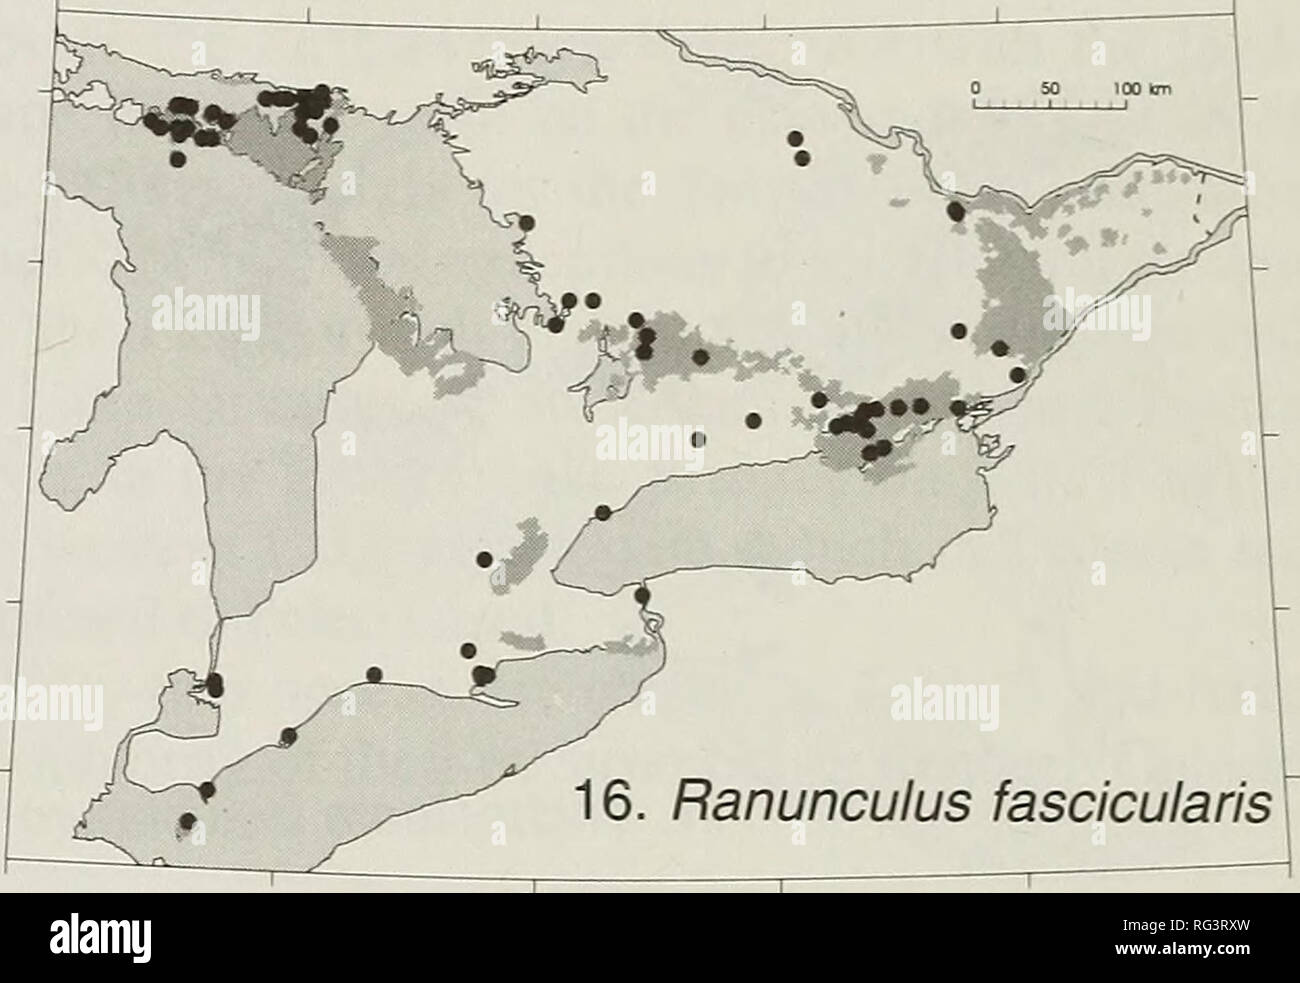 . The Canadian field-naturalist. Natural history. Figures 13-16. Distributions of vascular plants in southern Ontario (based on herbarium specimens) in relation to lime- stone plains (shaded). 13. Gewn triflorum. 14. Bouteloua curtipendiila. 15. Carex crawei. 16. Ranunculus fascicu- laris. slacks as suggested by their southern Ontario distri- butions. Geranium carolinianum (Figure 17), Draba reptans (Figure 22), and Myosotis verna (Figure 18) grow on sandy flats and strands as well as on alvars. A less frequent alternative habitat is cliffs, particu- larly of dolomite and marble, which are the Stock Photo